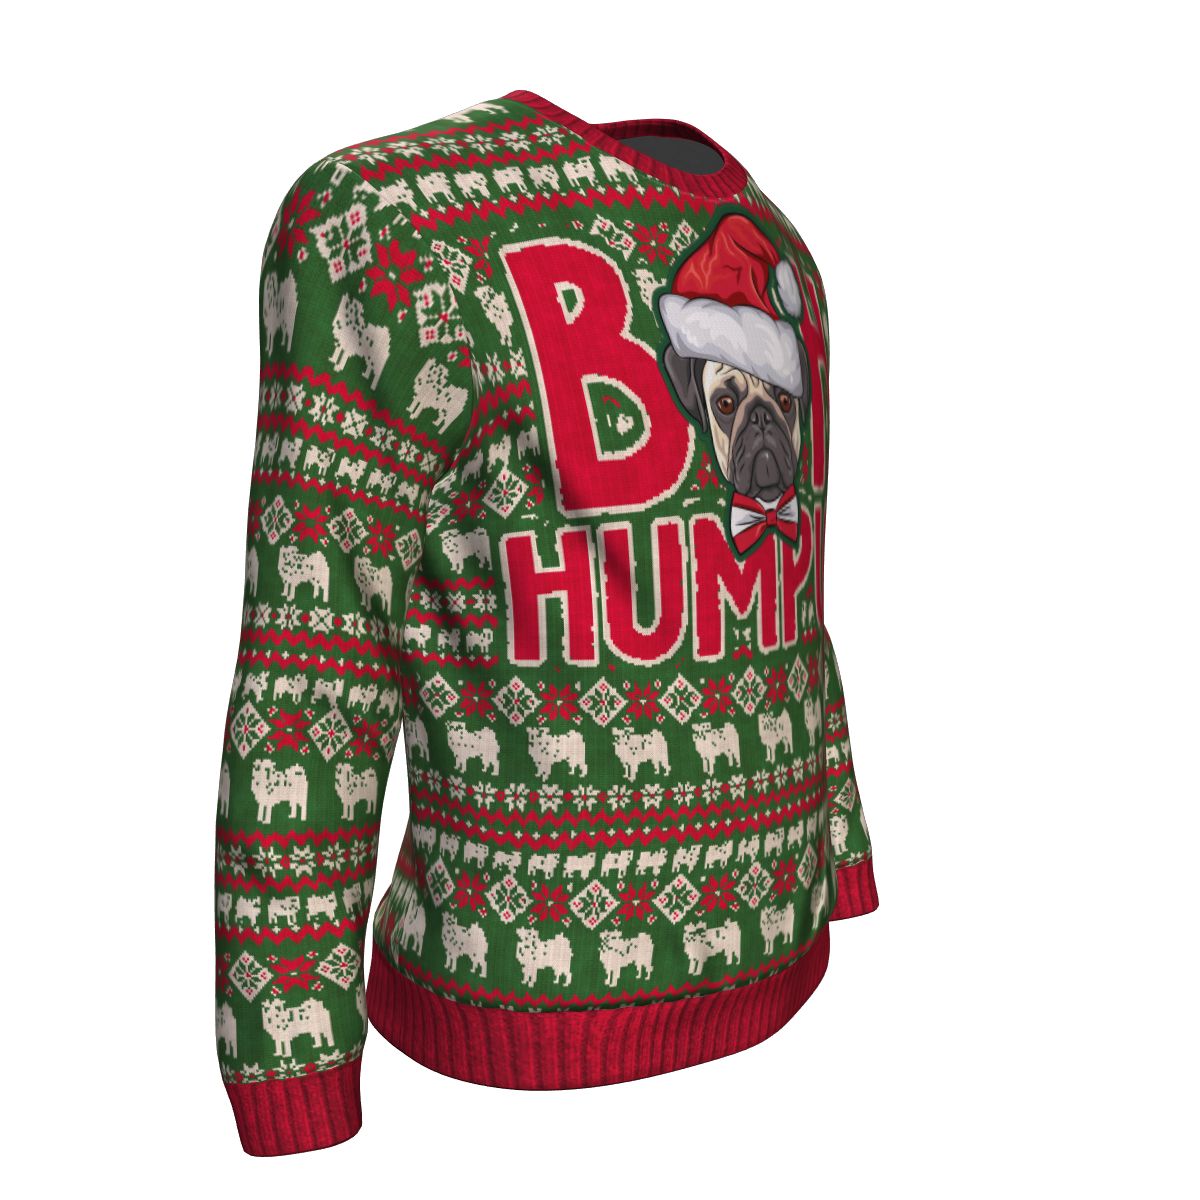 Bah Hum Pug Ugly Christmas Sweater-red/green/white - JaZazzy 